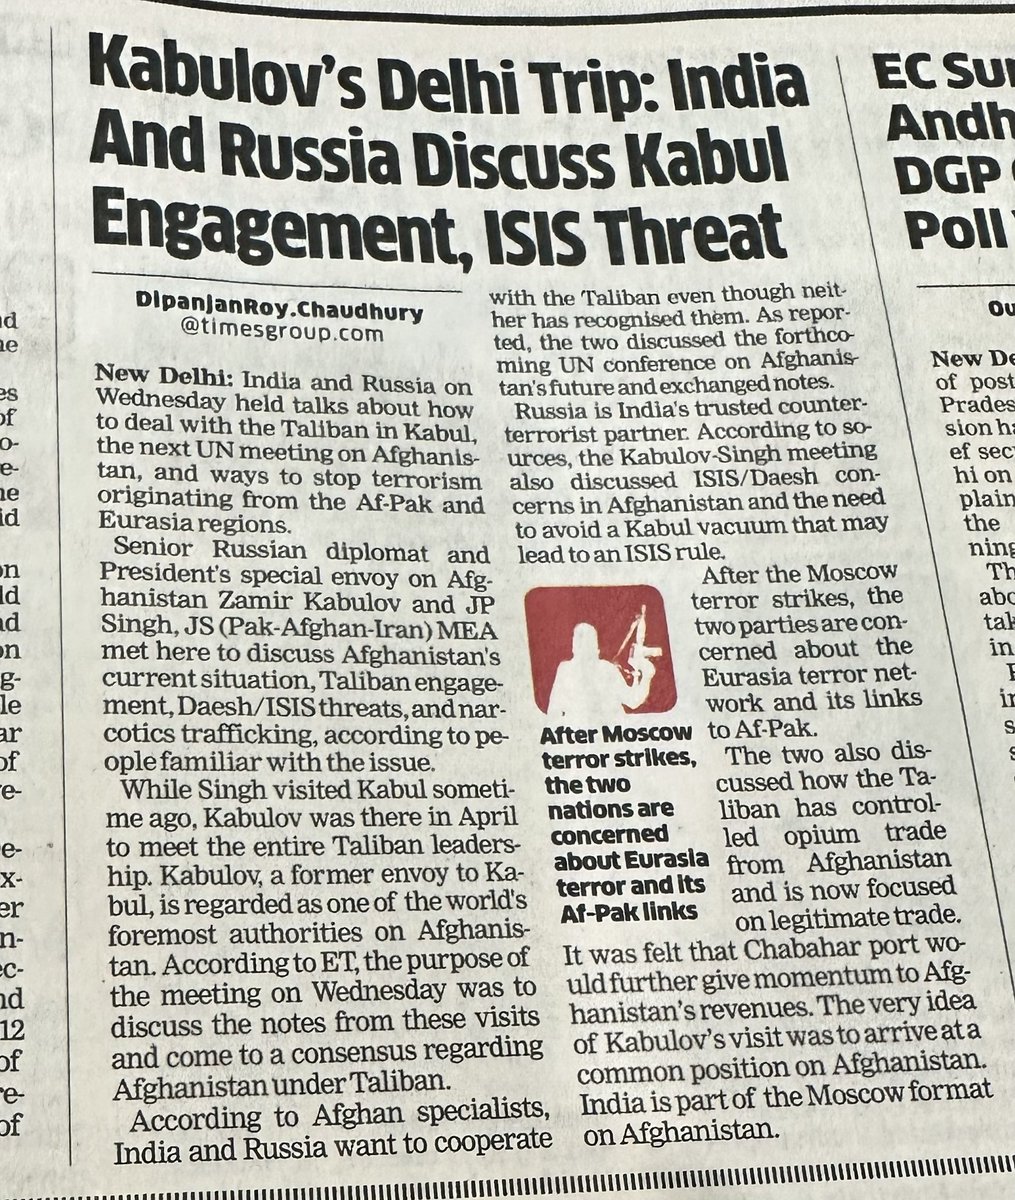 I write how India & Russia are attempting to arrive at common approach in Afghanistan from countering ISIS to opium trade & preventing vacuum in Kabul. Focus also on upcoming UN meeting on Afghan issue ⁦@ETPolitics⁩ ⁦@pranabsamanta⁩